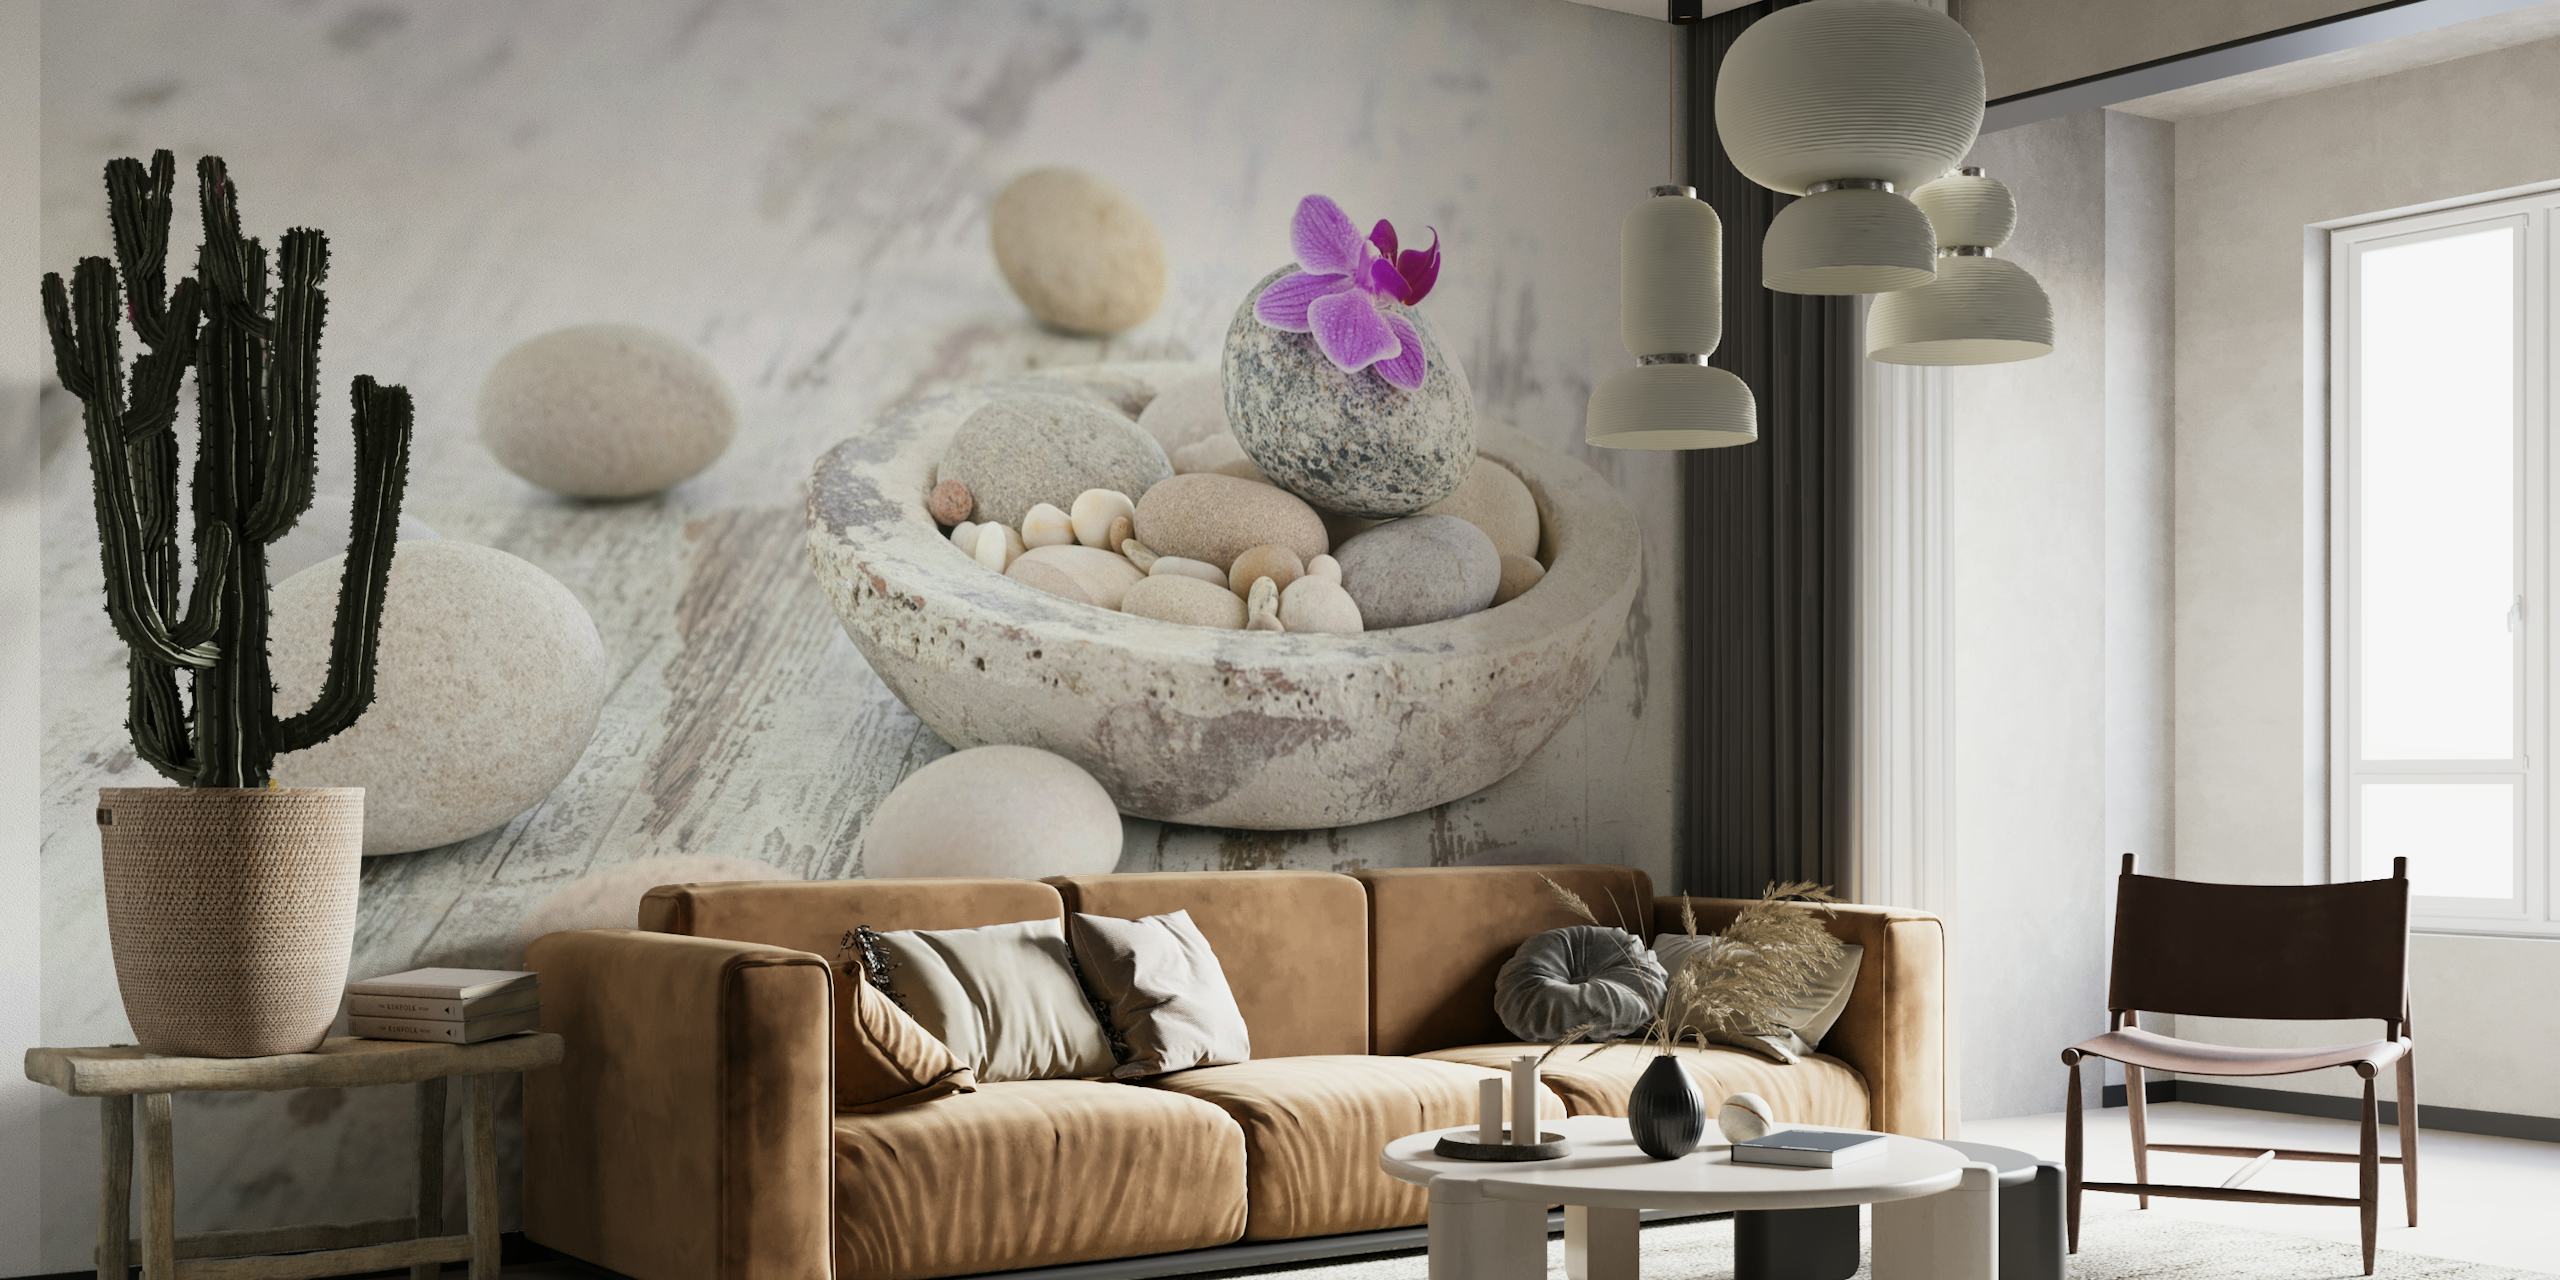 Zen Style Still Life With Pebble And Orchid wallpaper